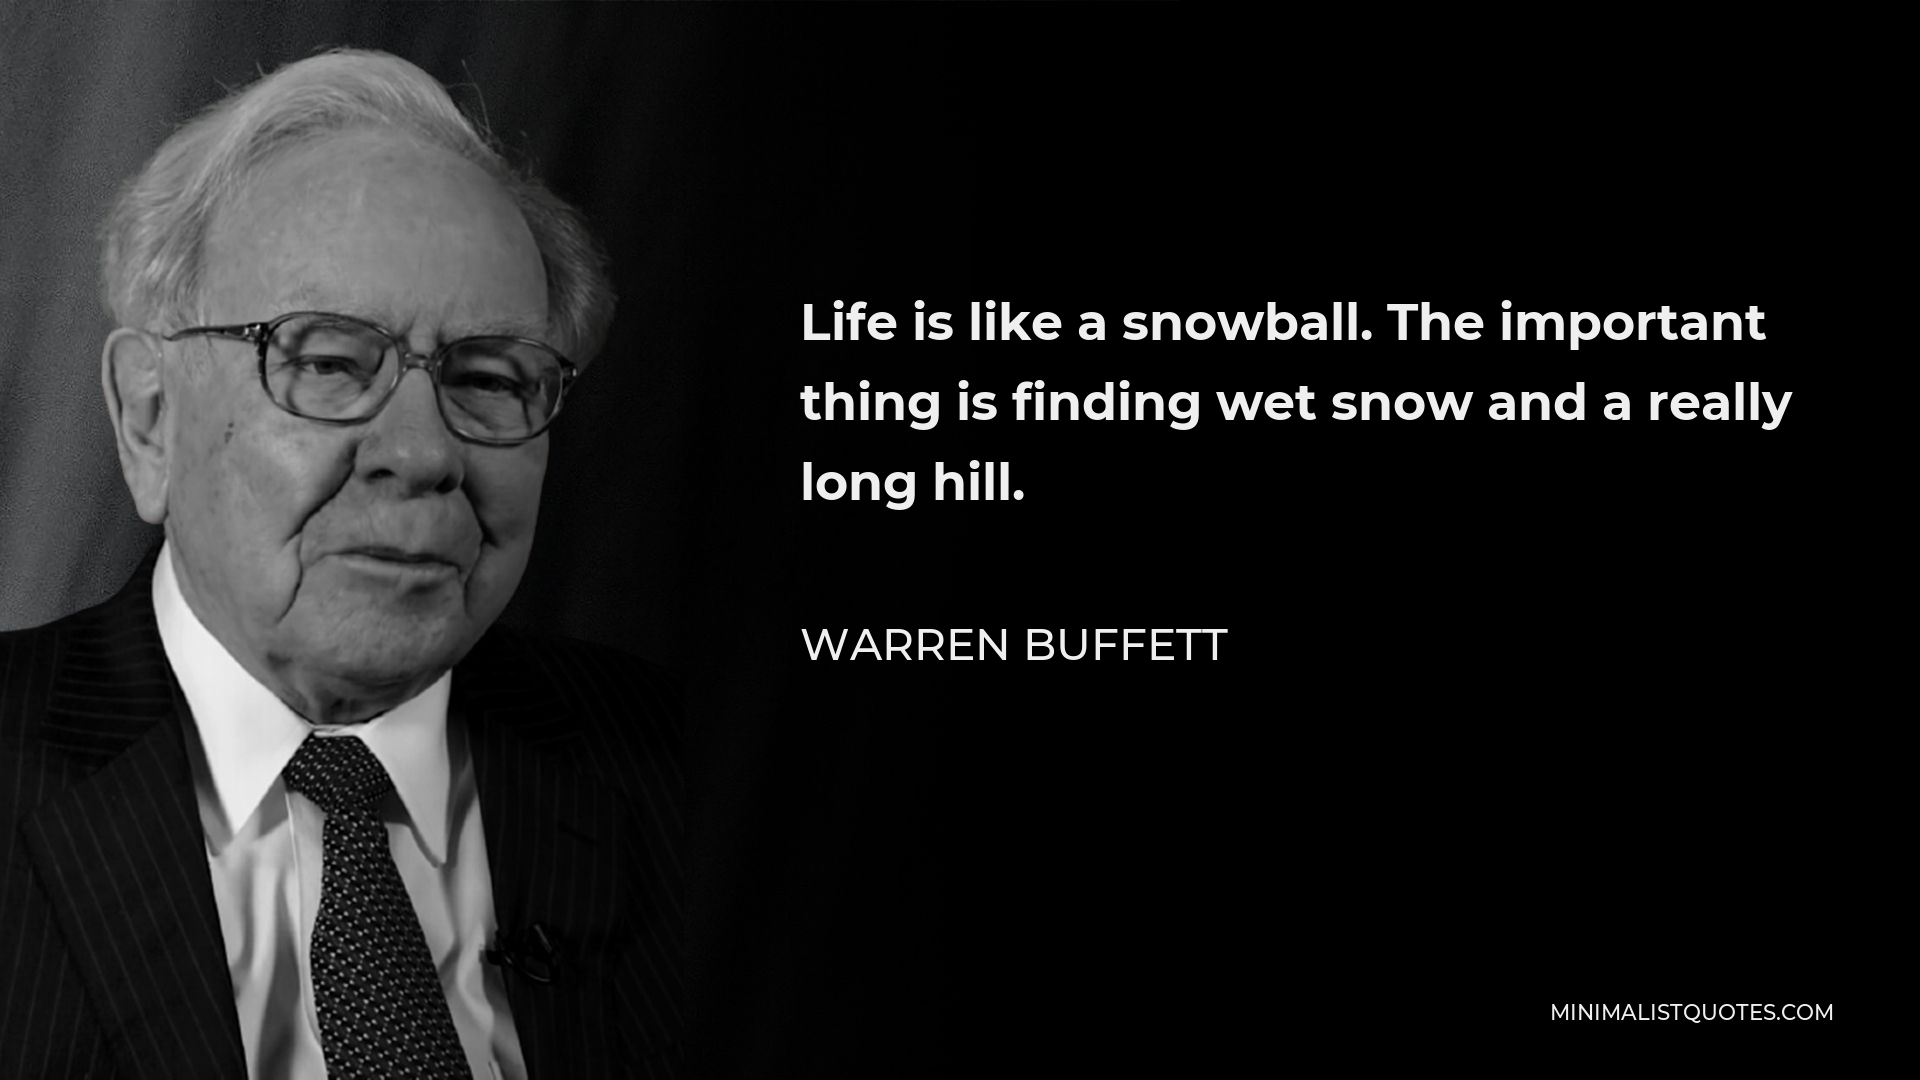 Warren Buffett Quote - Life is like a snowball. The important thing is finding wet snow and a really long hill.